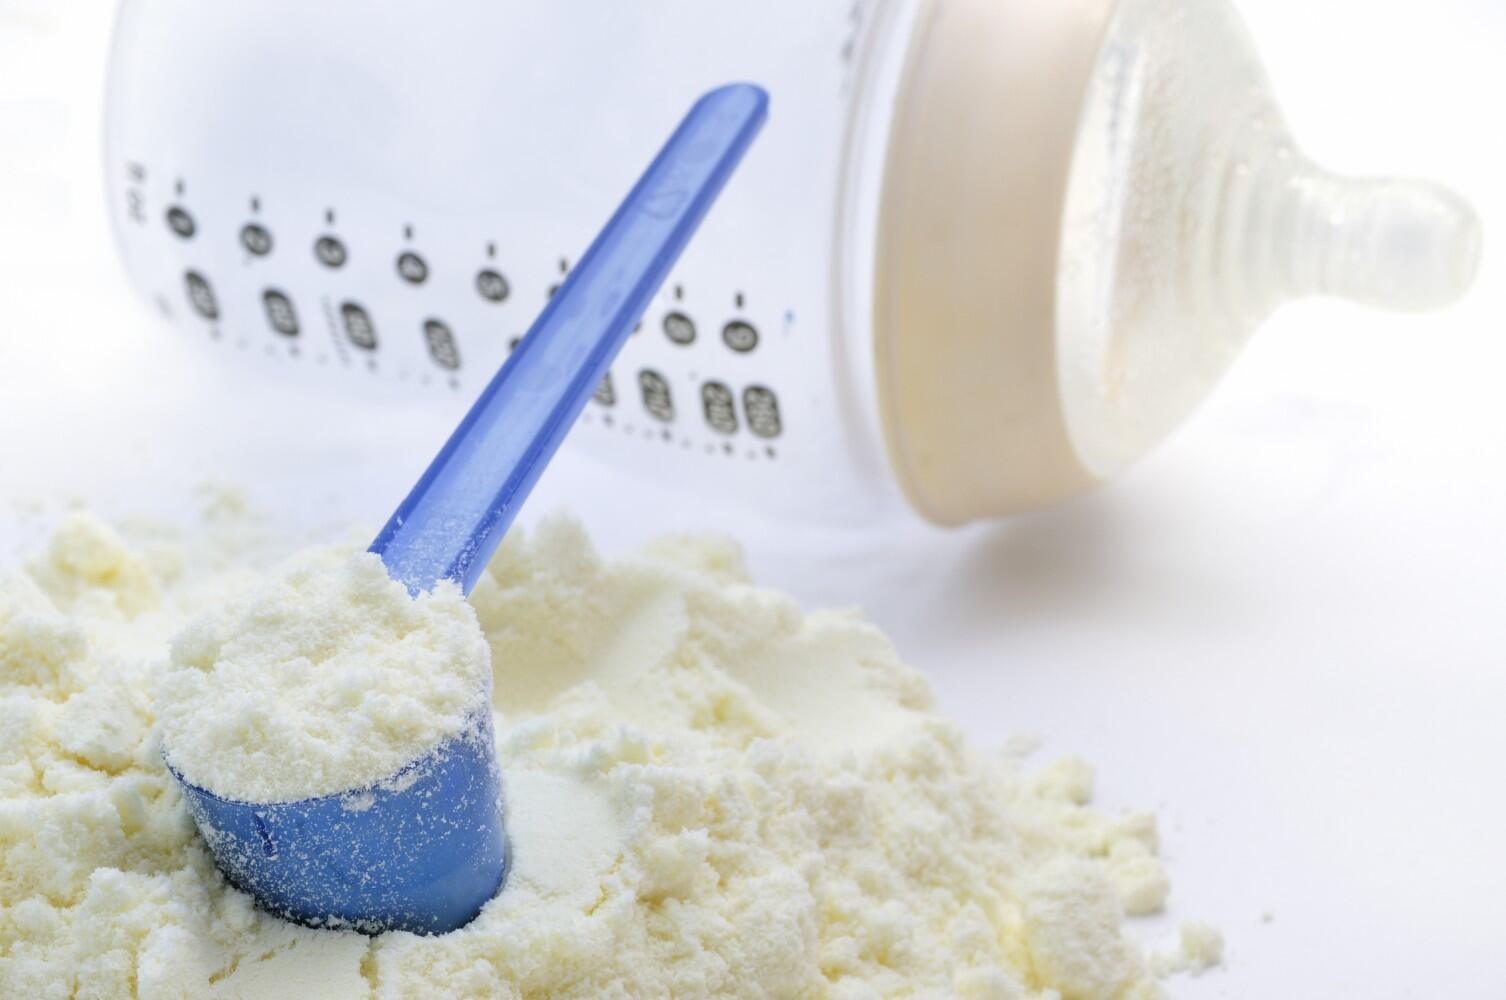 Journal of Dairy Science articles focus on infant formula shortage 